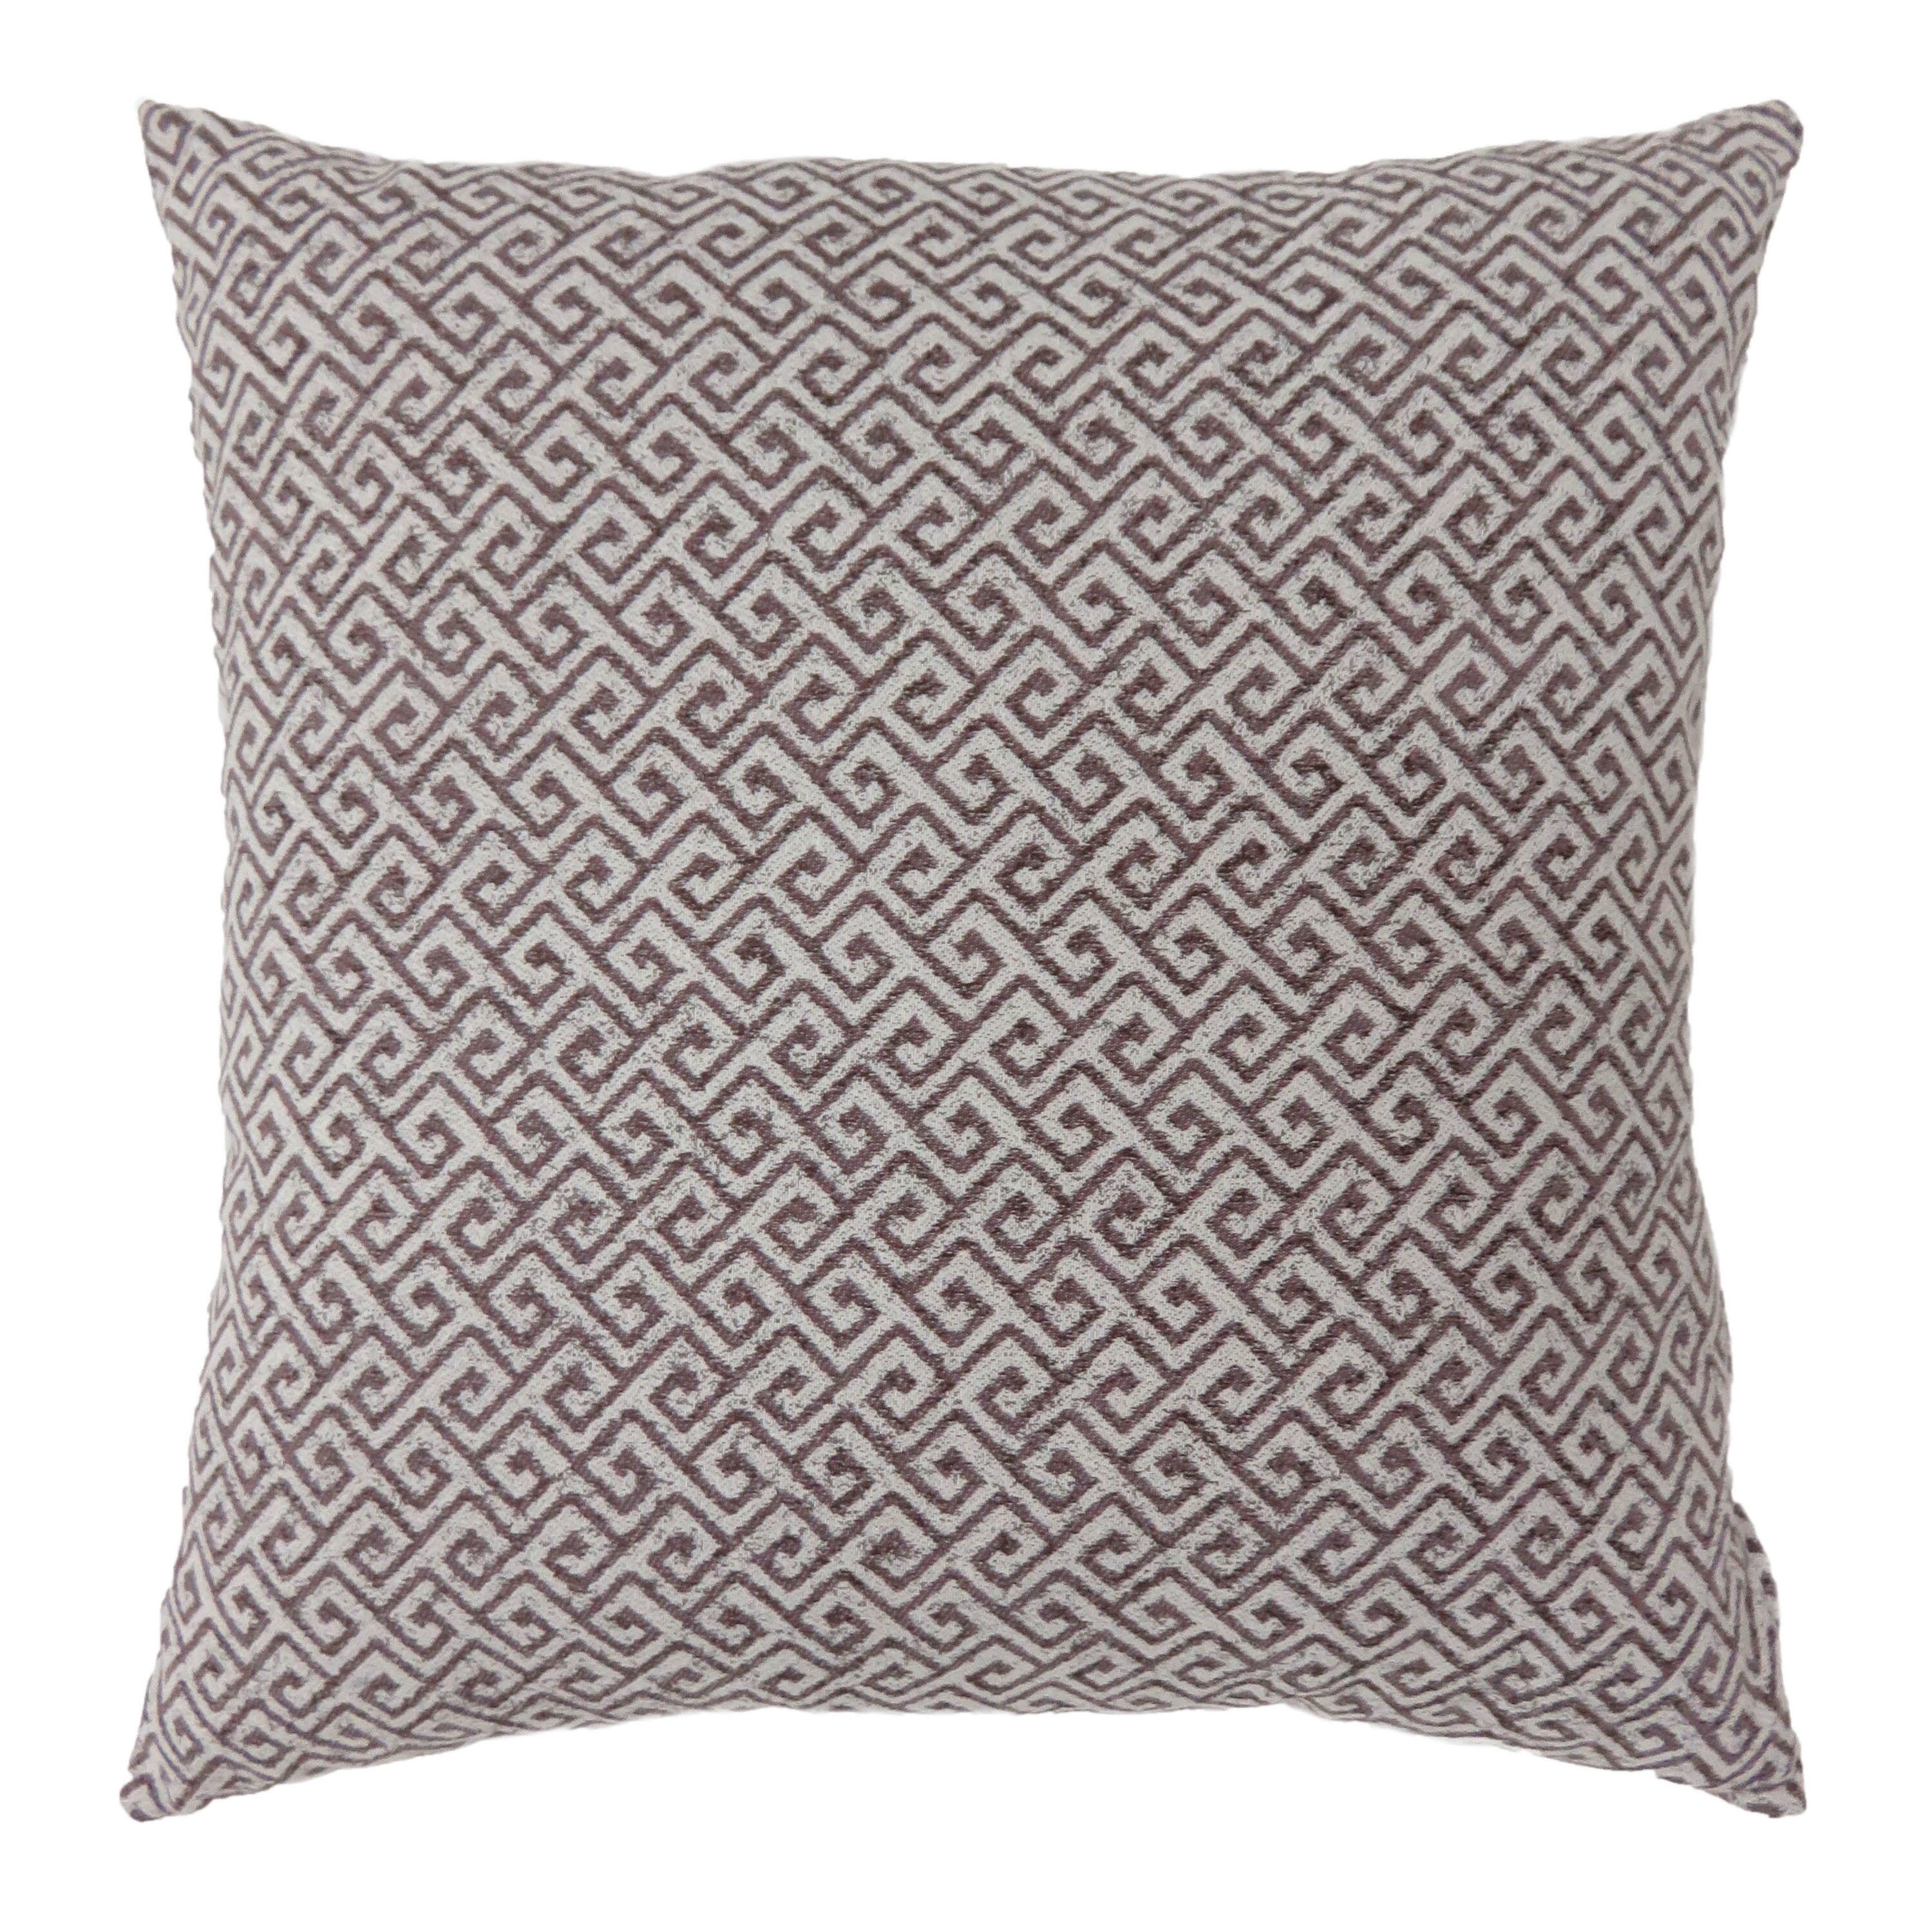 Joni Contemporary Fabric Throw Pillows (Set of 2) by Furniture of America